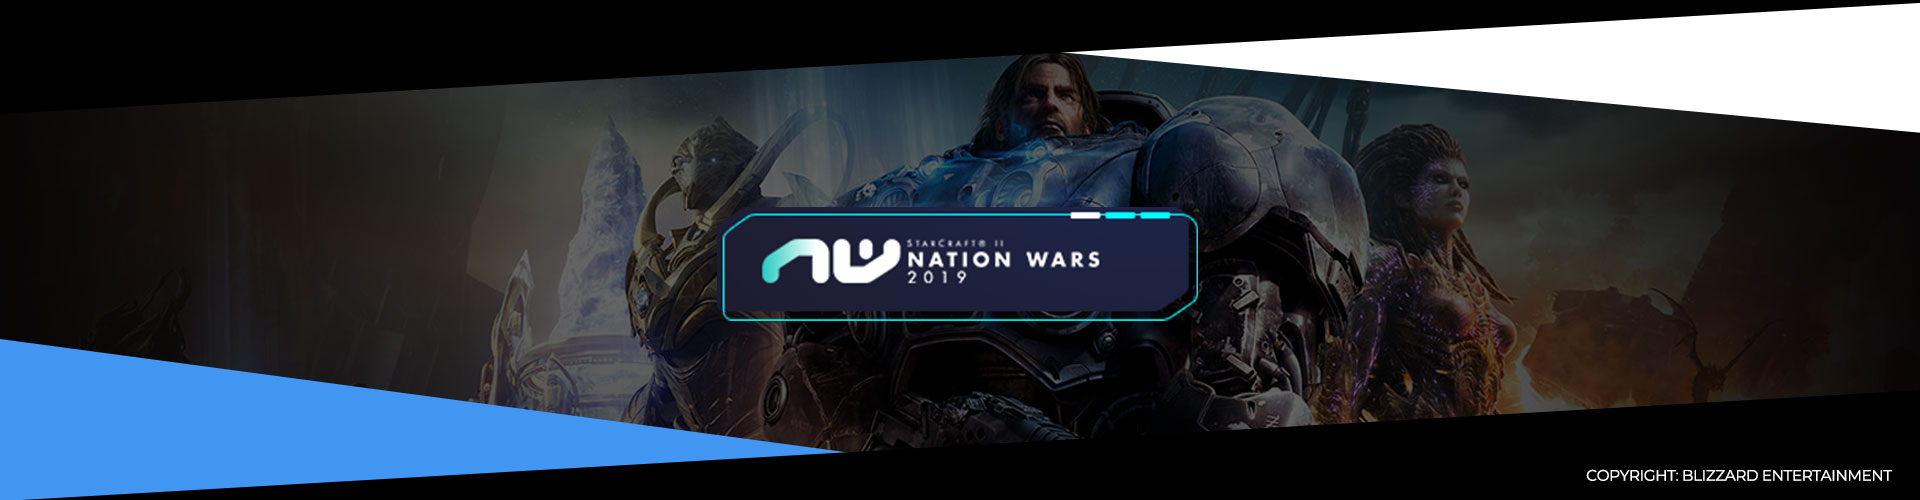 Nation Wars 2019 Event Preview